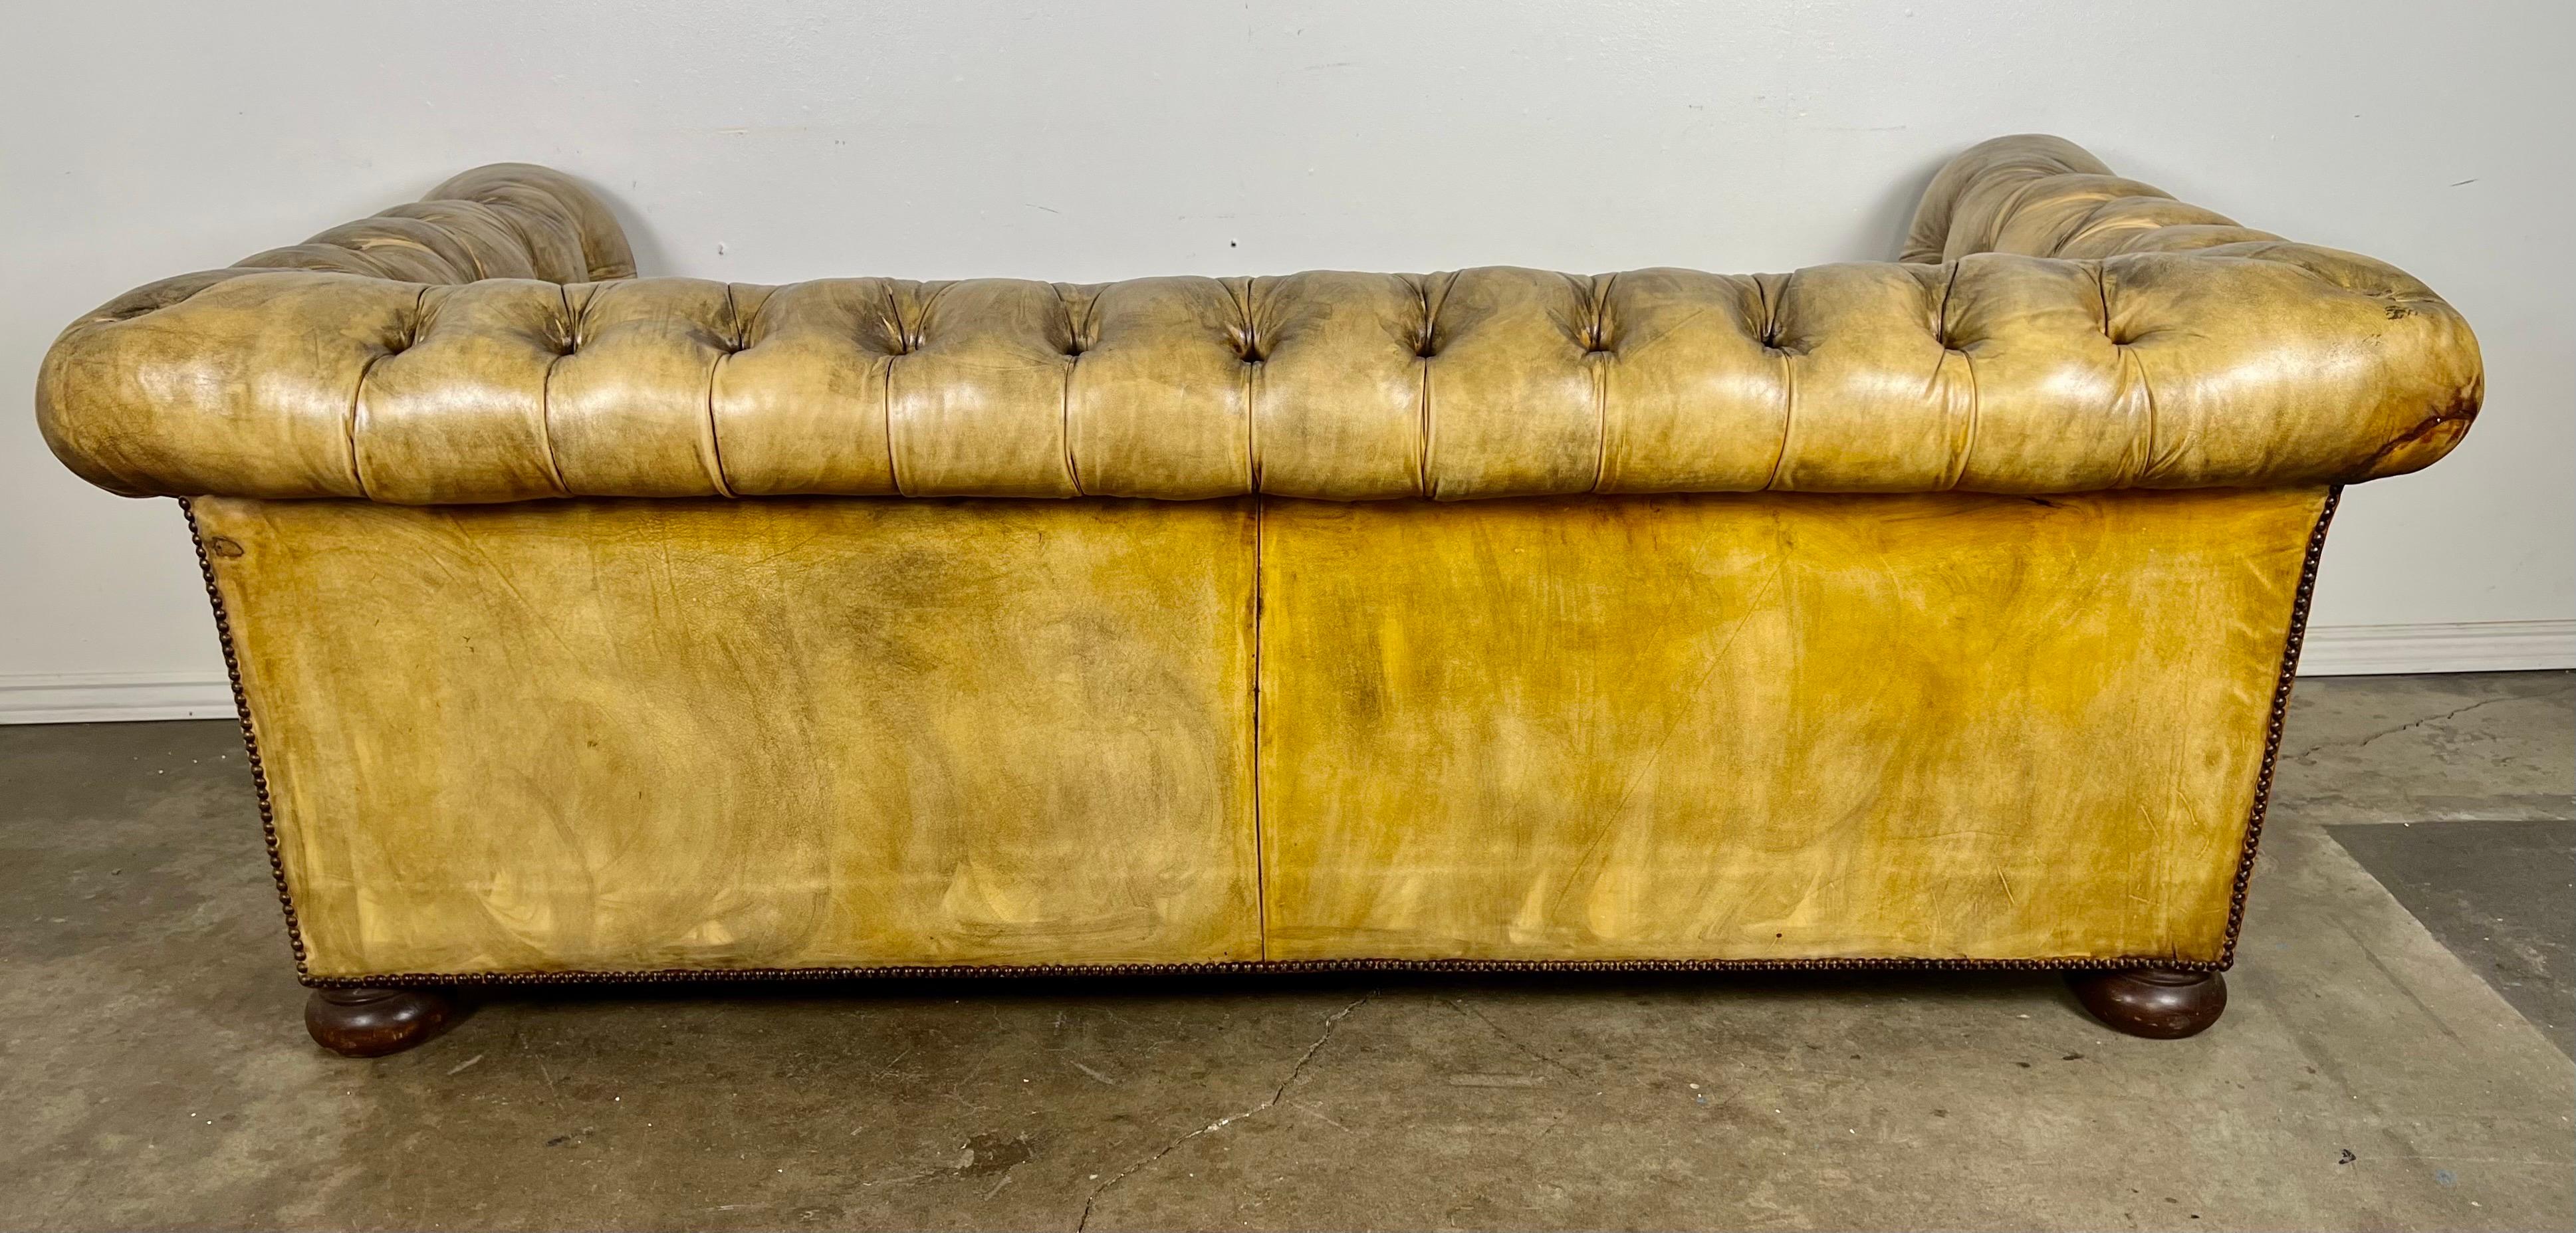 Vintage English Chesterfield Style Leather Tufted Sofa C. 1920's For Sale 11